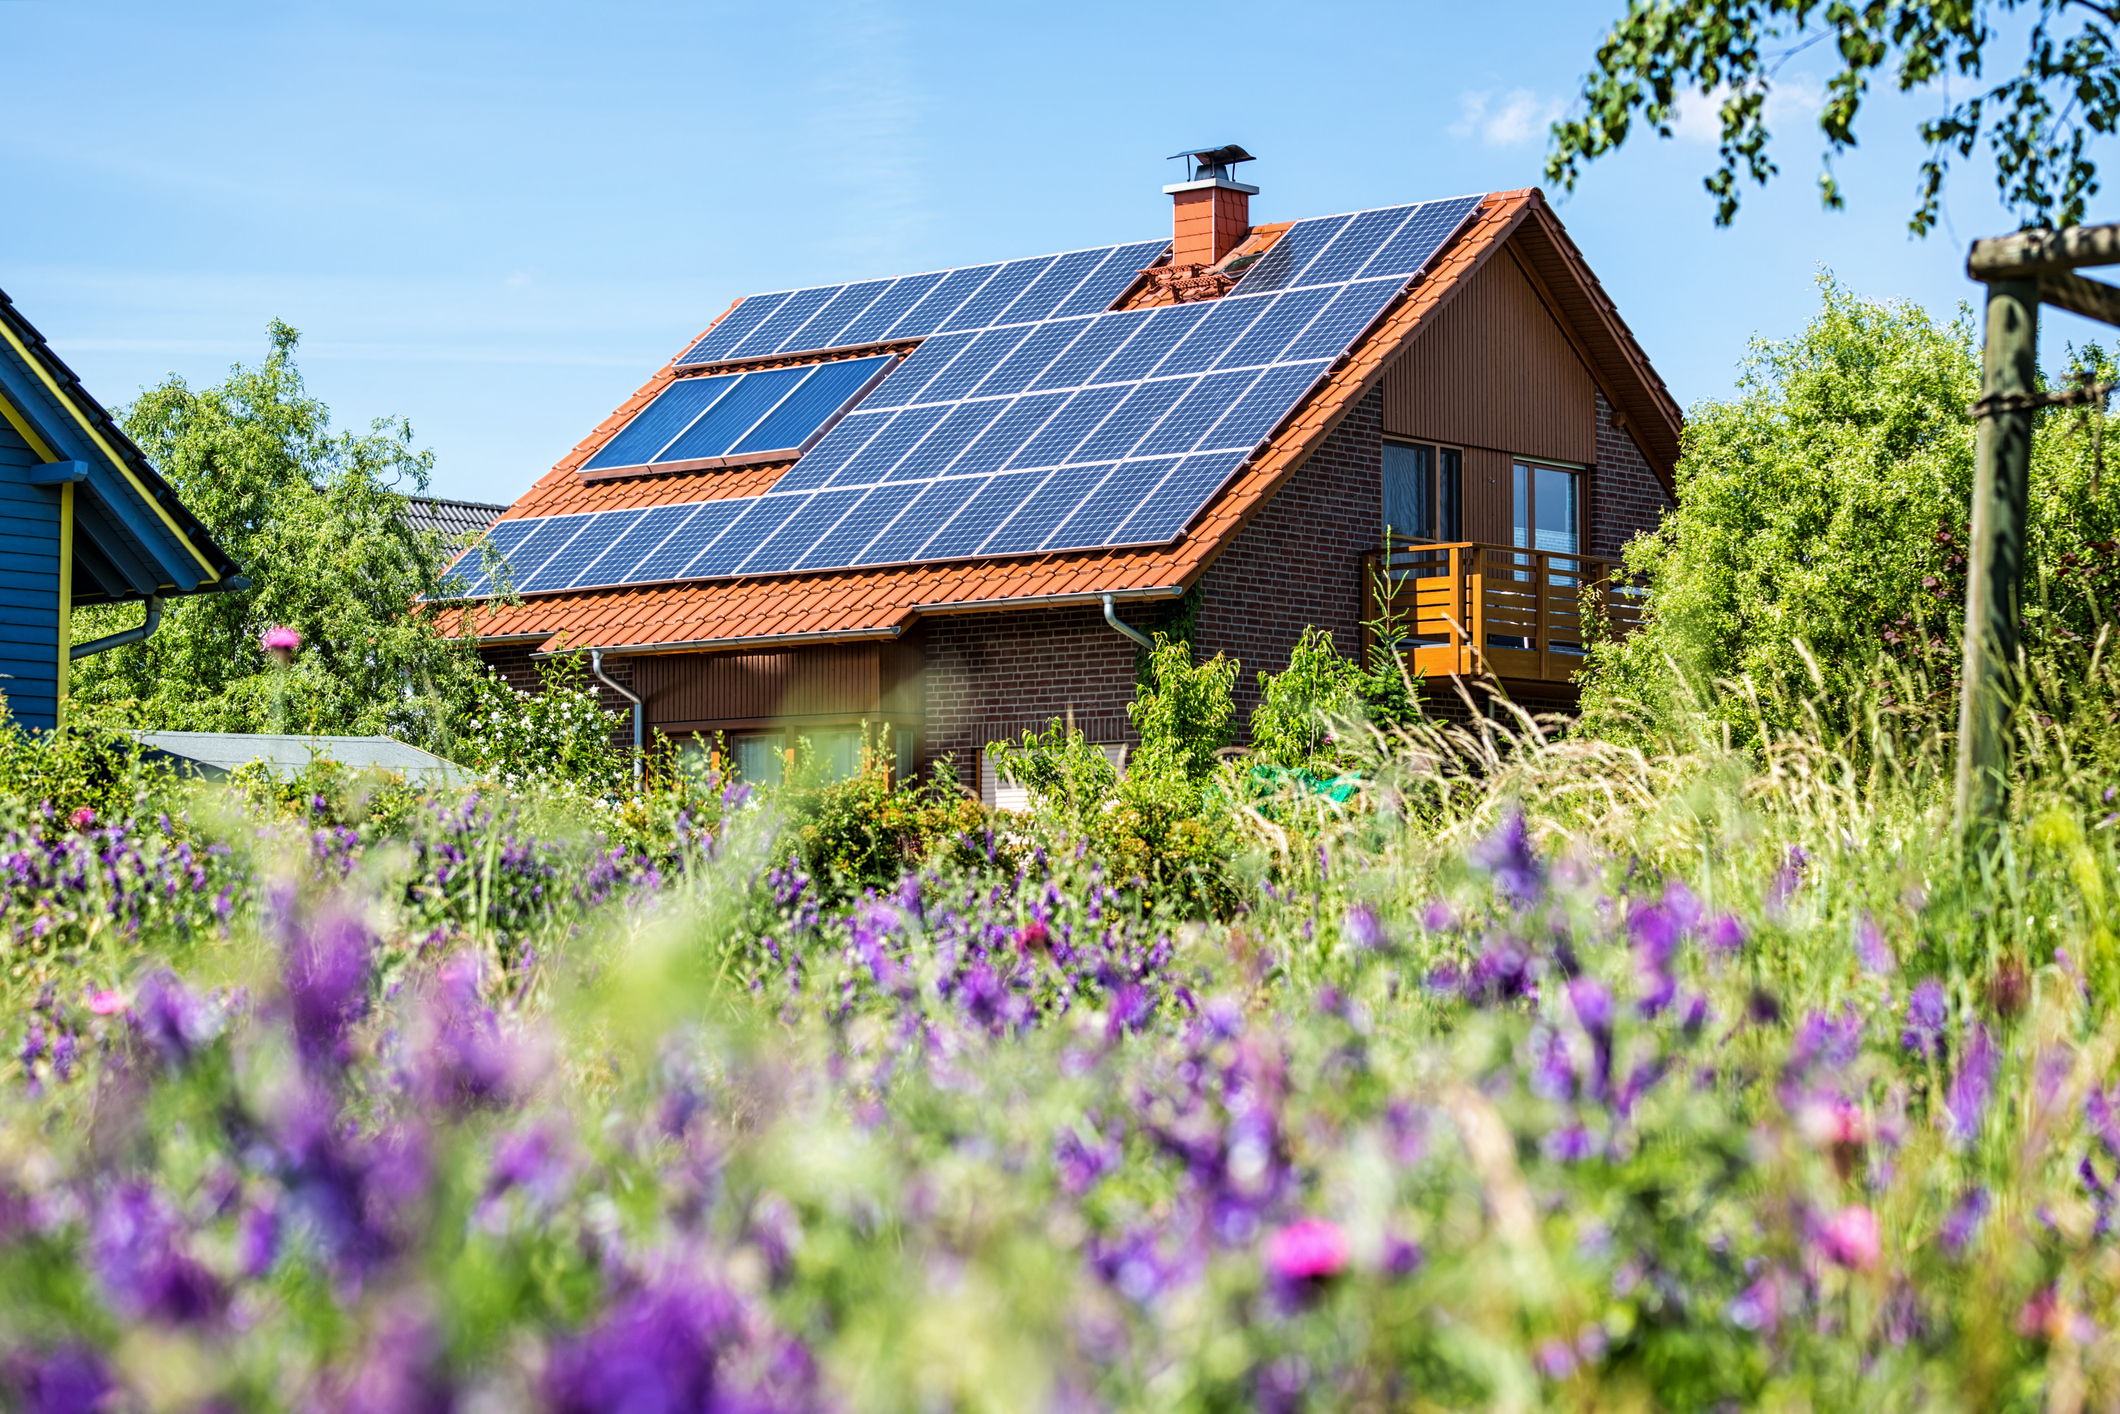 House with solar panels in summertime